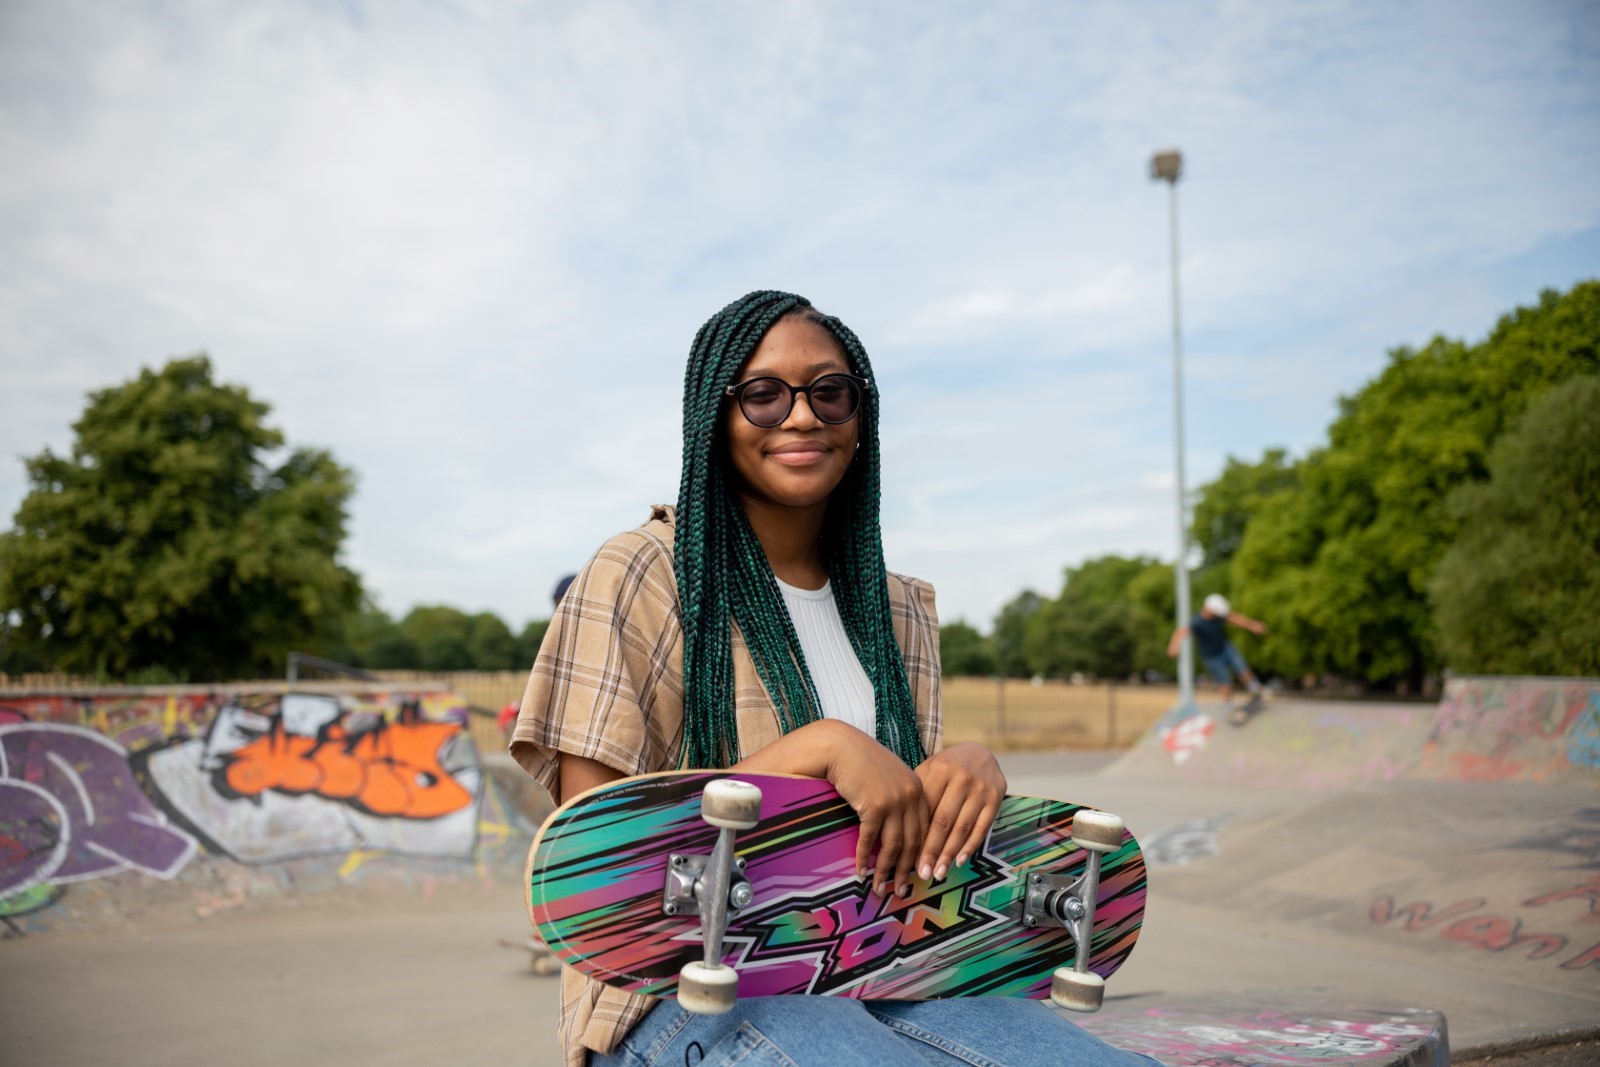 Image shows young woman in sunglases smiling at teh camera holding her skateboard